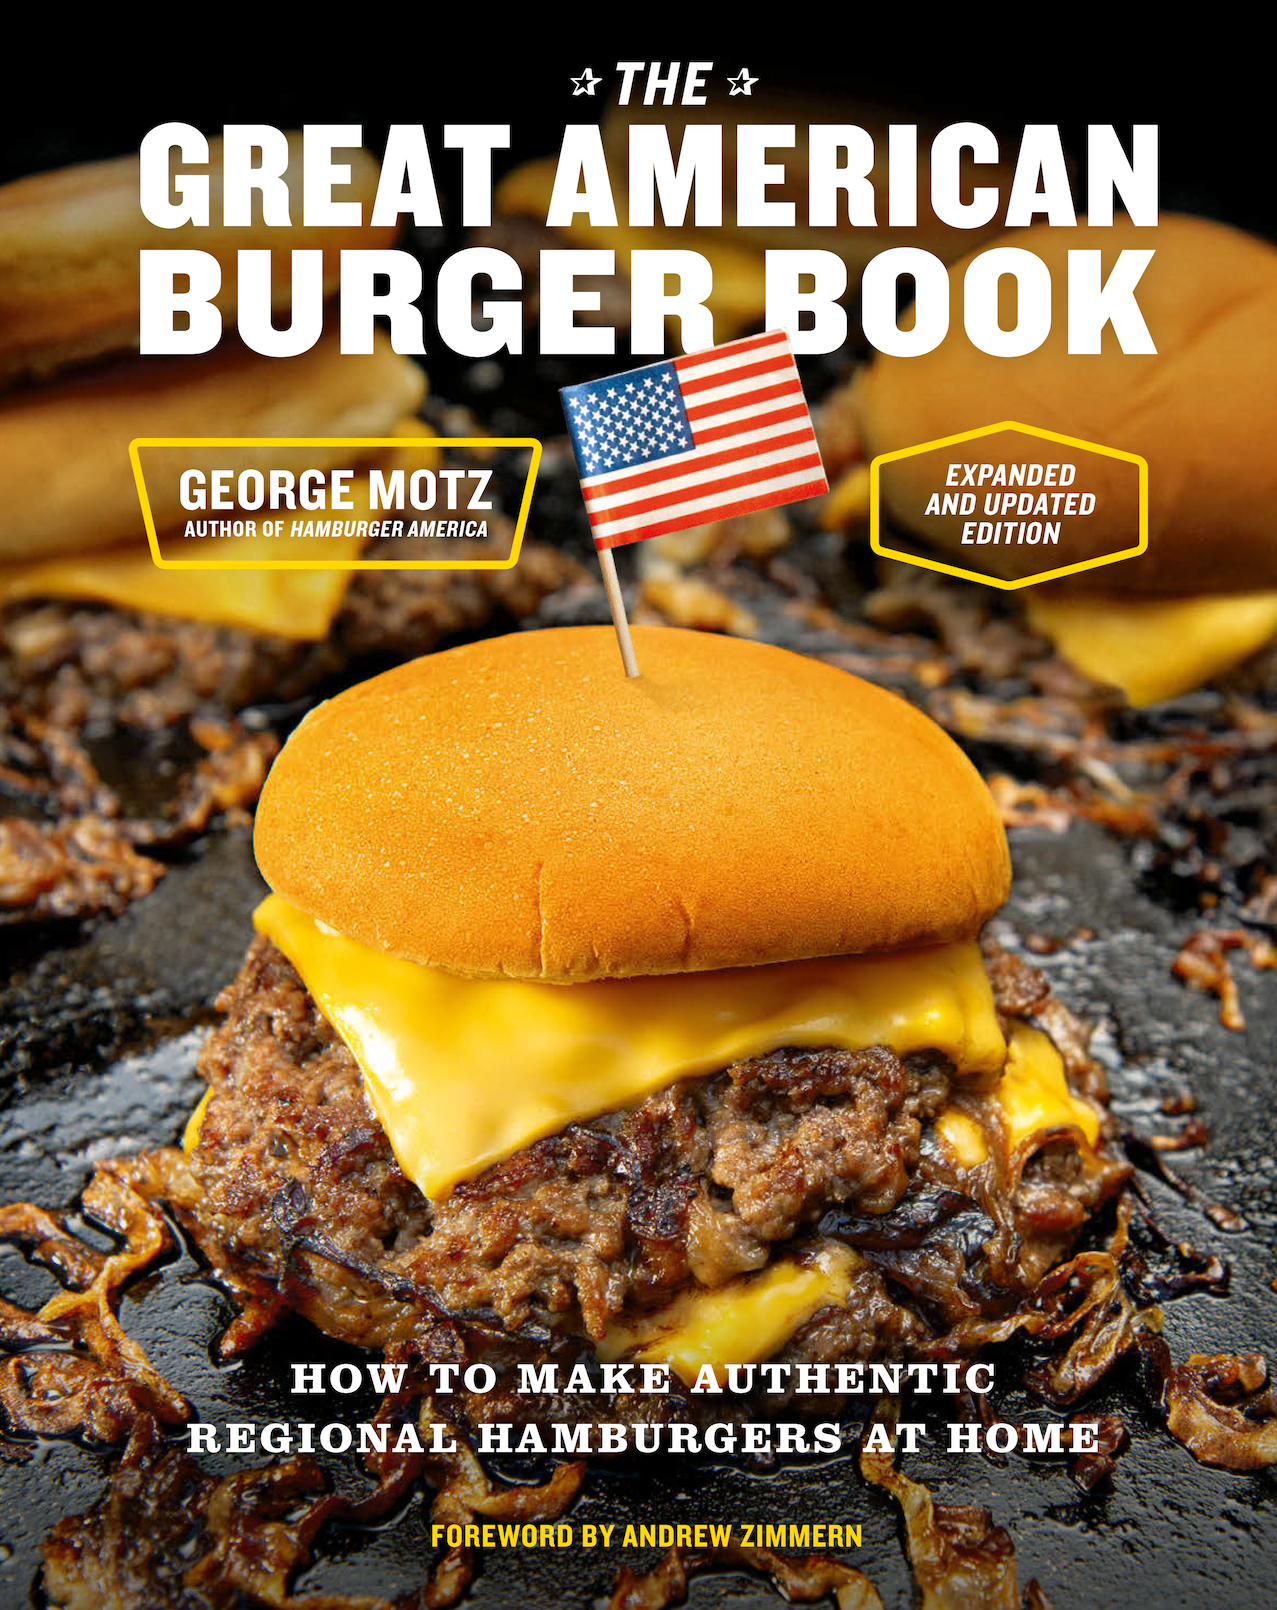 Cooking Pop-Up with Burger Expert George Motz in conversation with Brian Braiker